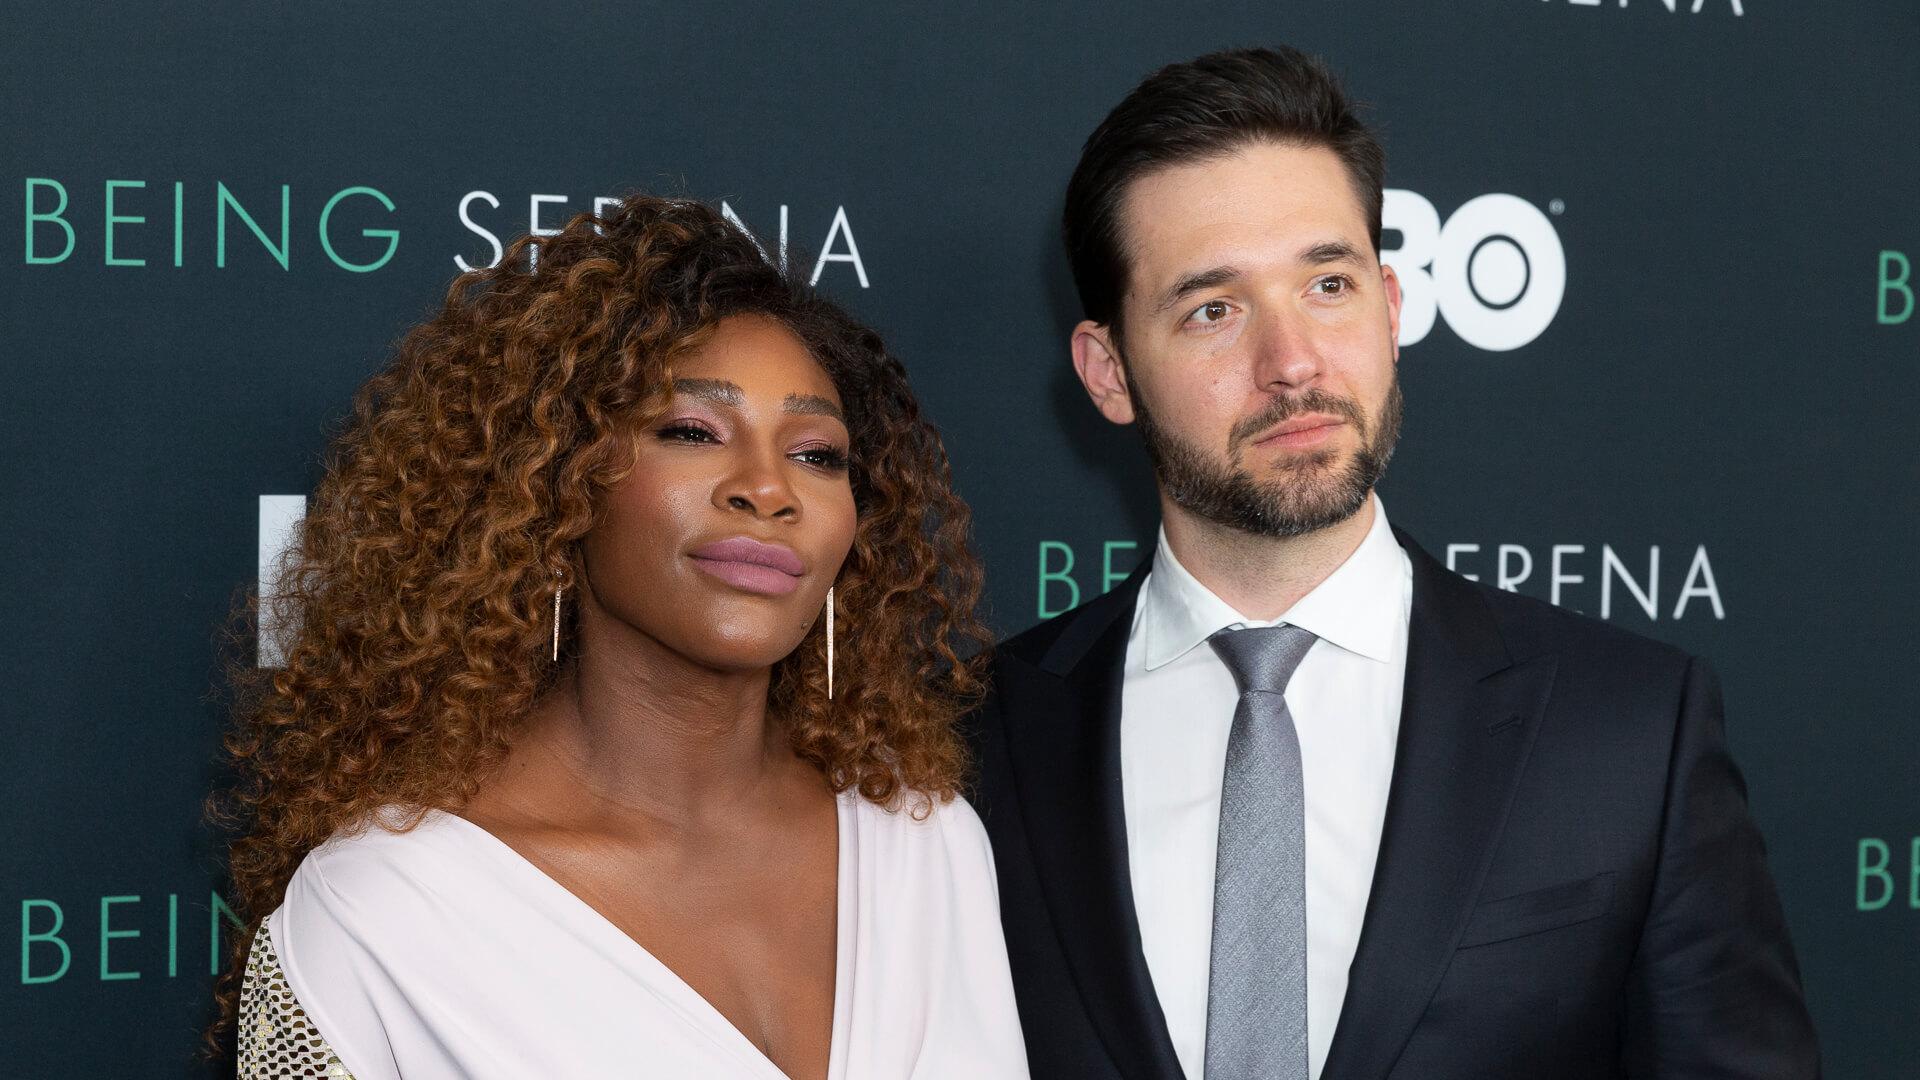 Serena Williams and Alexis Ohanian attend Being Serena premiere